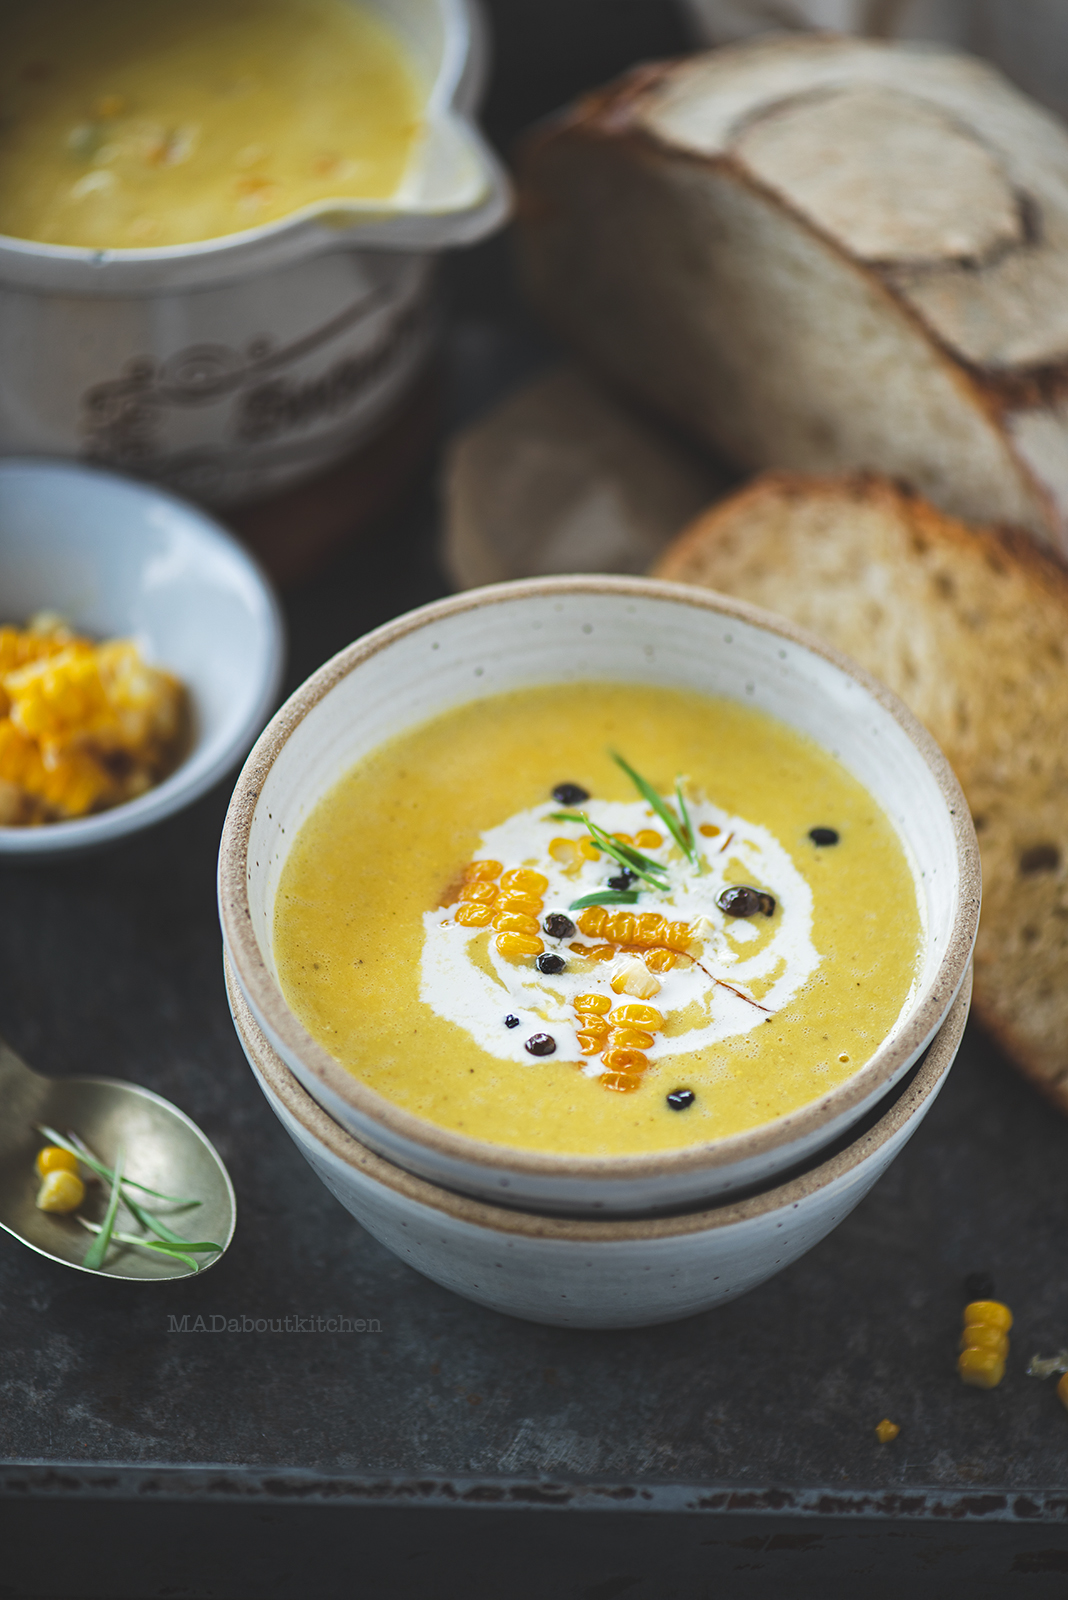 Corn soup is a creamy, light soup that is flavoured using garlic, rosemary and is served with a slice of crusty sourdough bread.